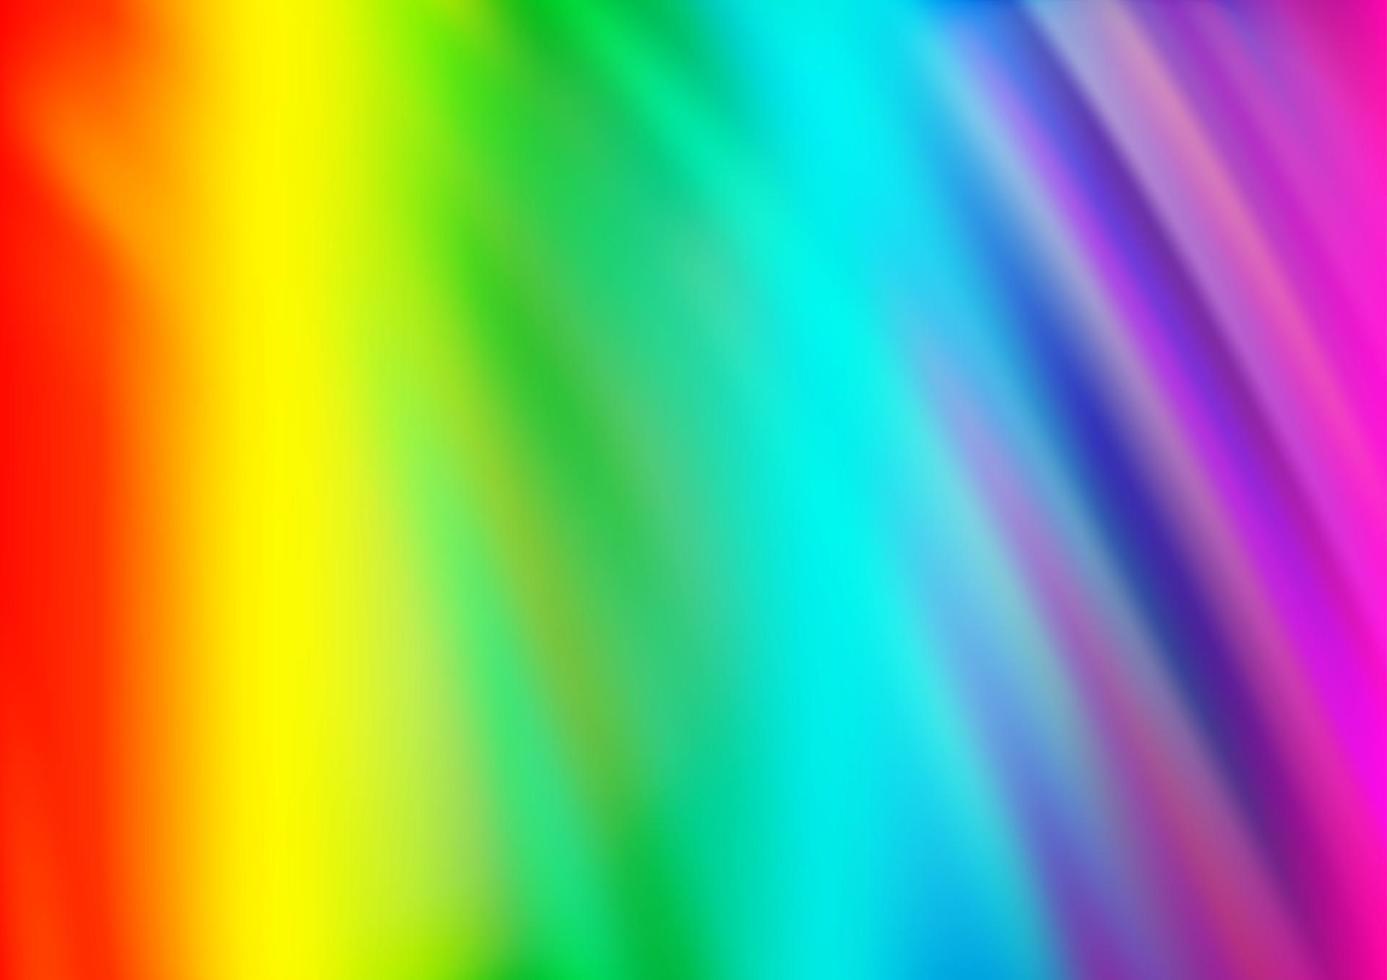 Light Multicolor, Rainbow vector background with curved circles.